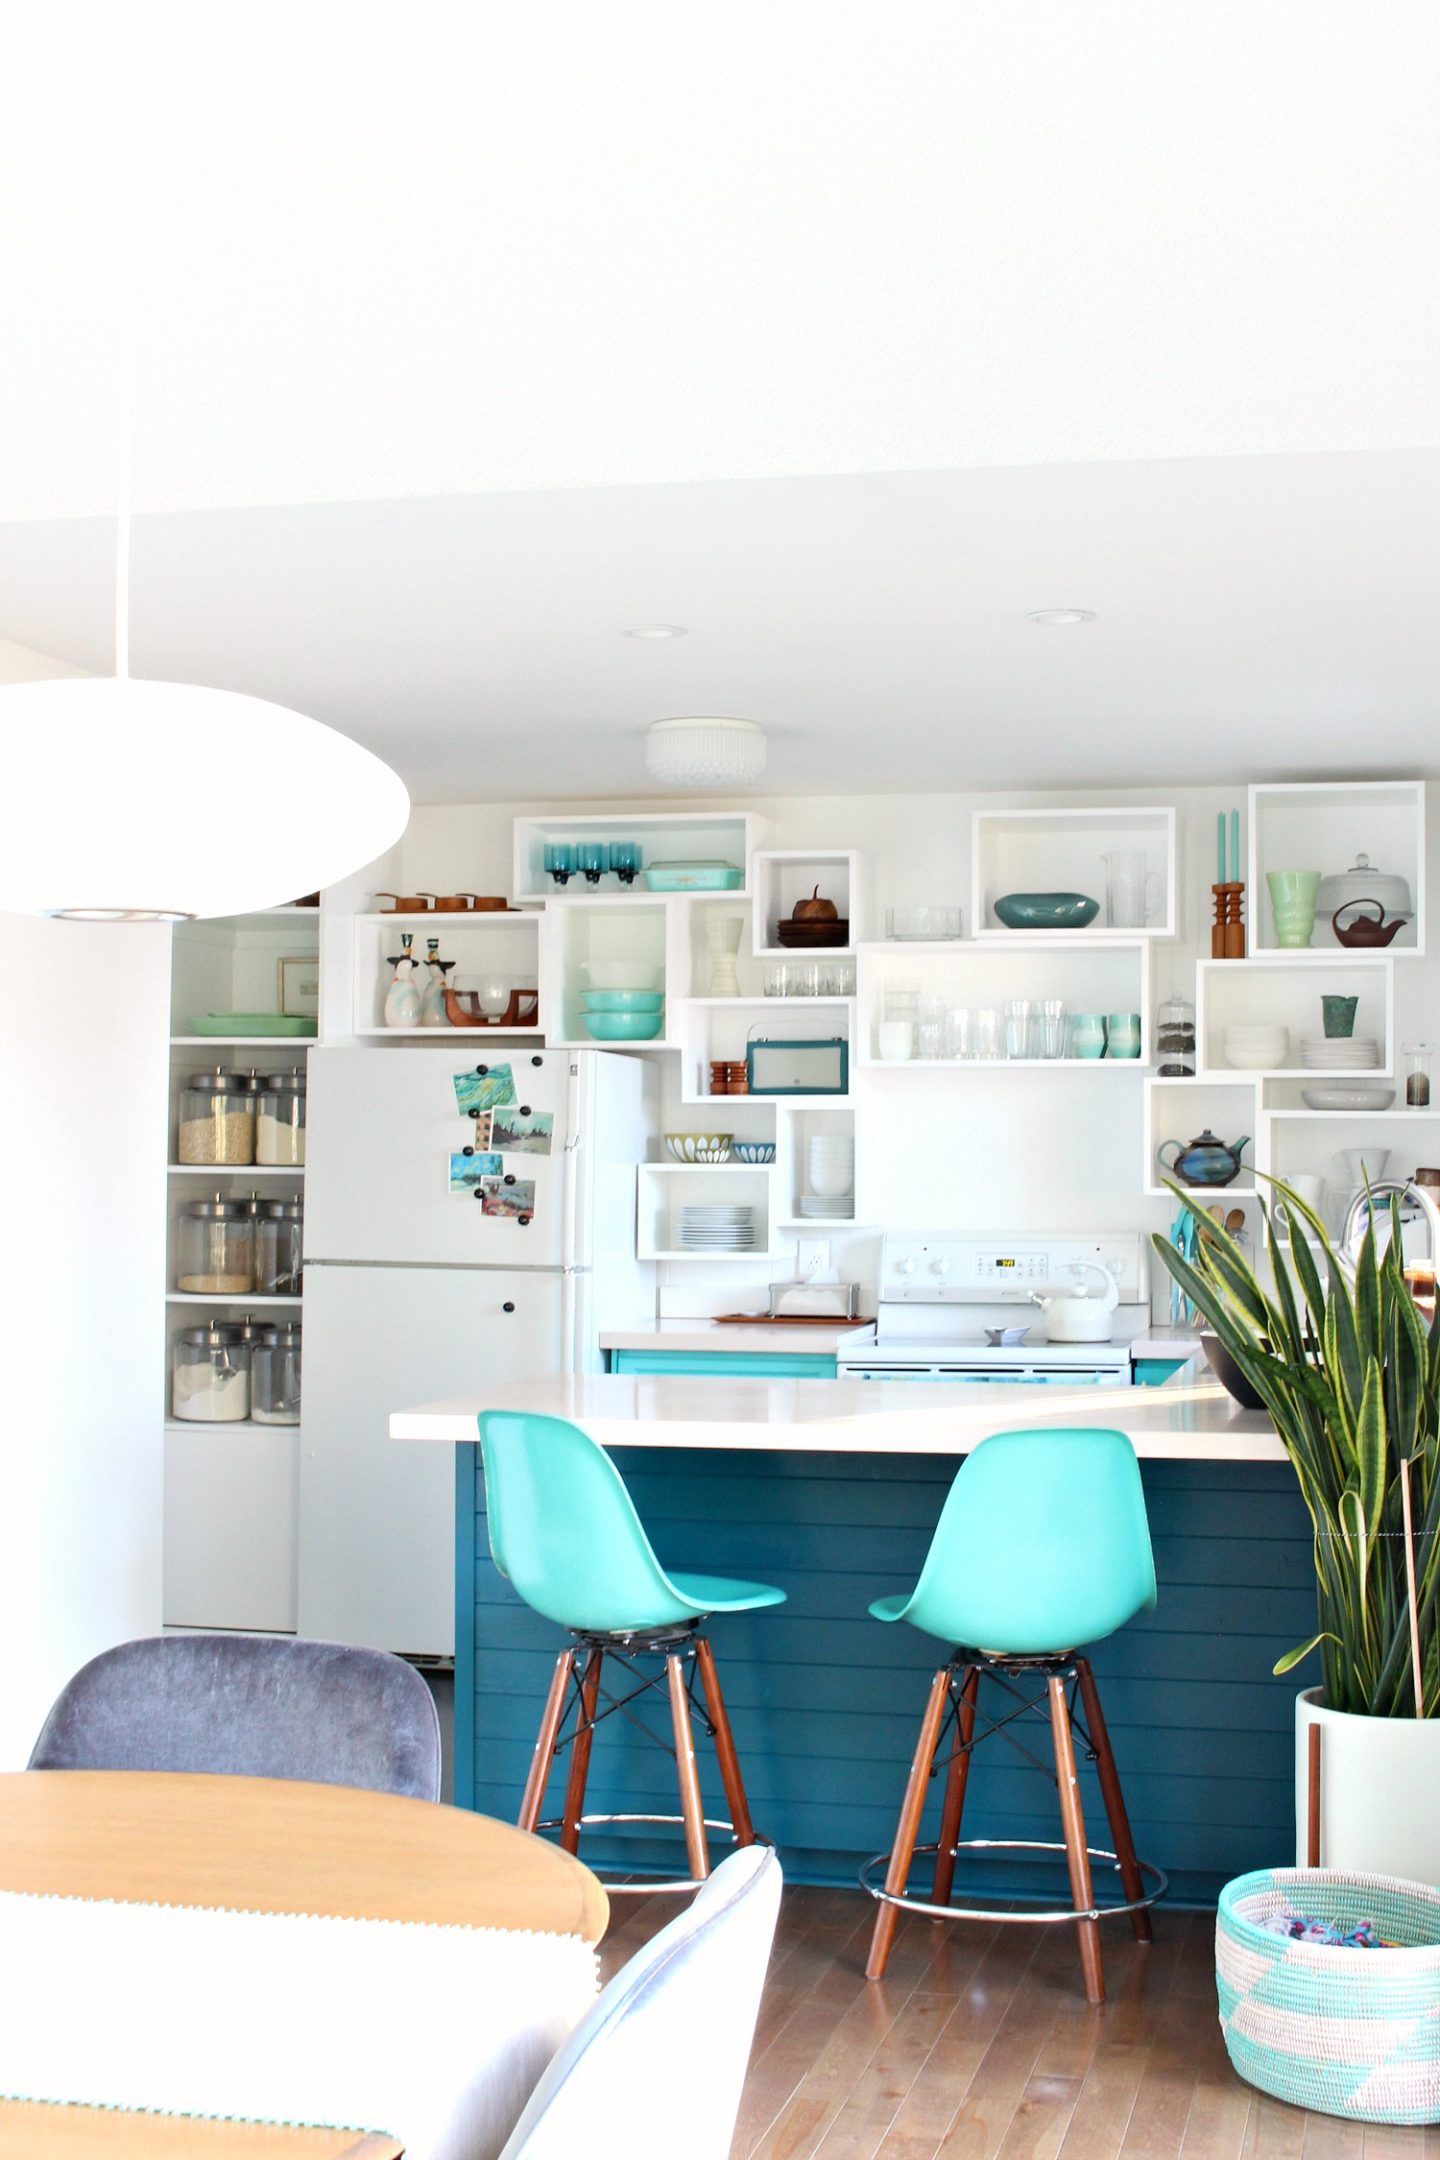 How to Build Wall Cubbies | Fresh Take on Kitchen Open Shelving. Teal Kitchen with Storage Cubbies DIY Instead of Open Shelving. #openshelving #diystorage #diyblog #diyhomedecor #diykitchen